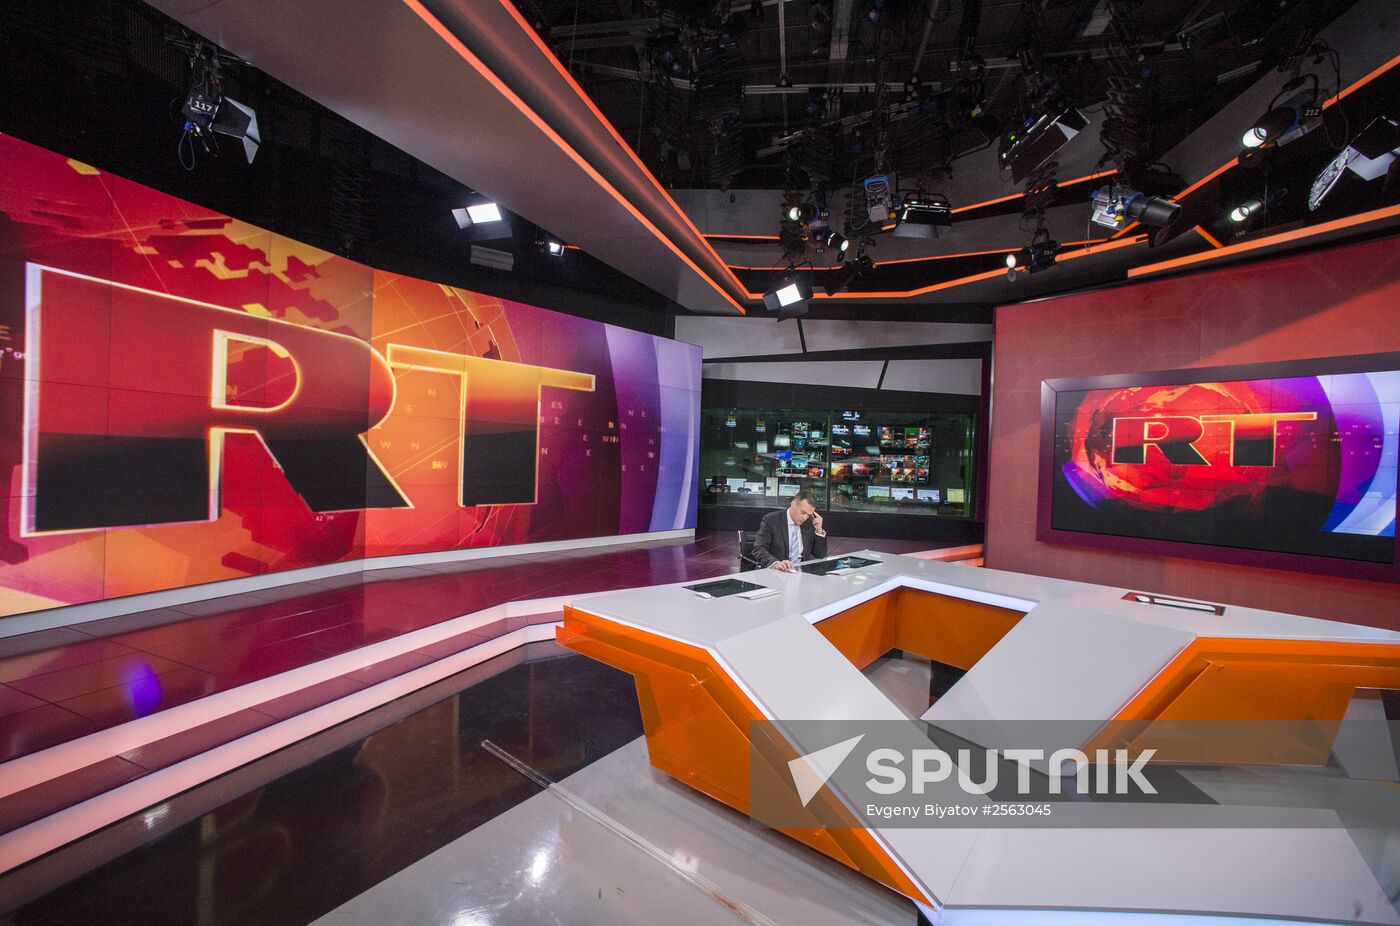 Russia Today channel